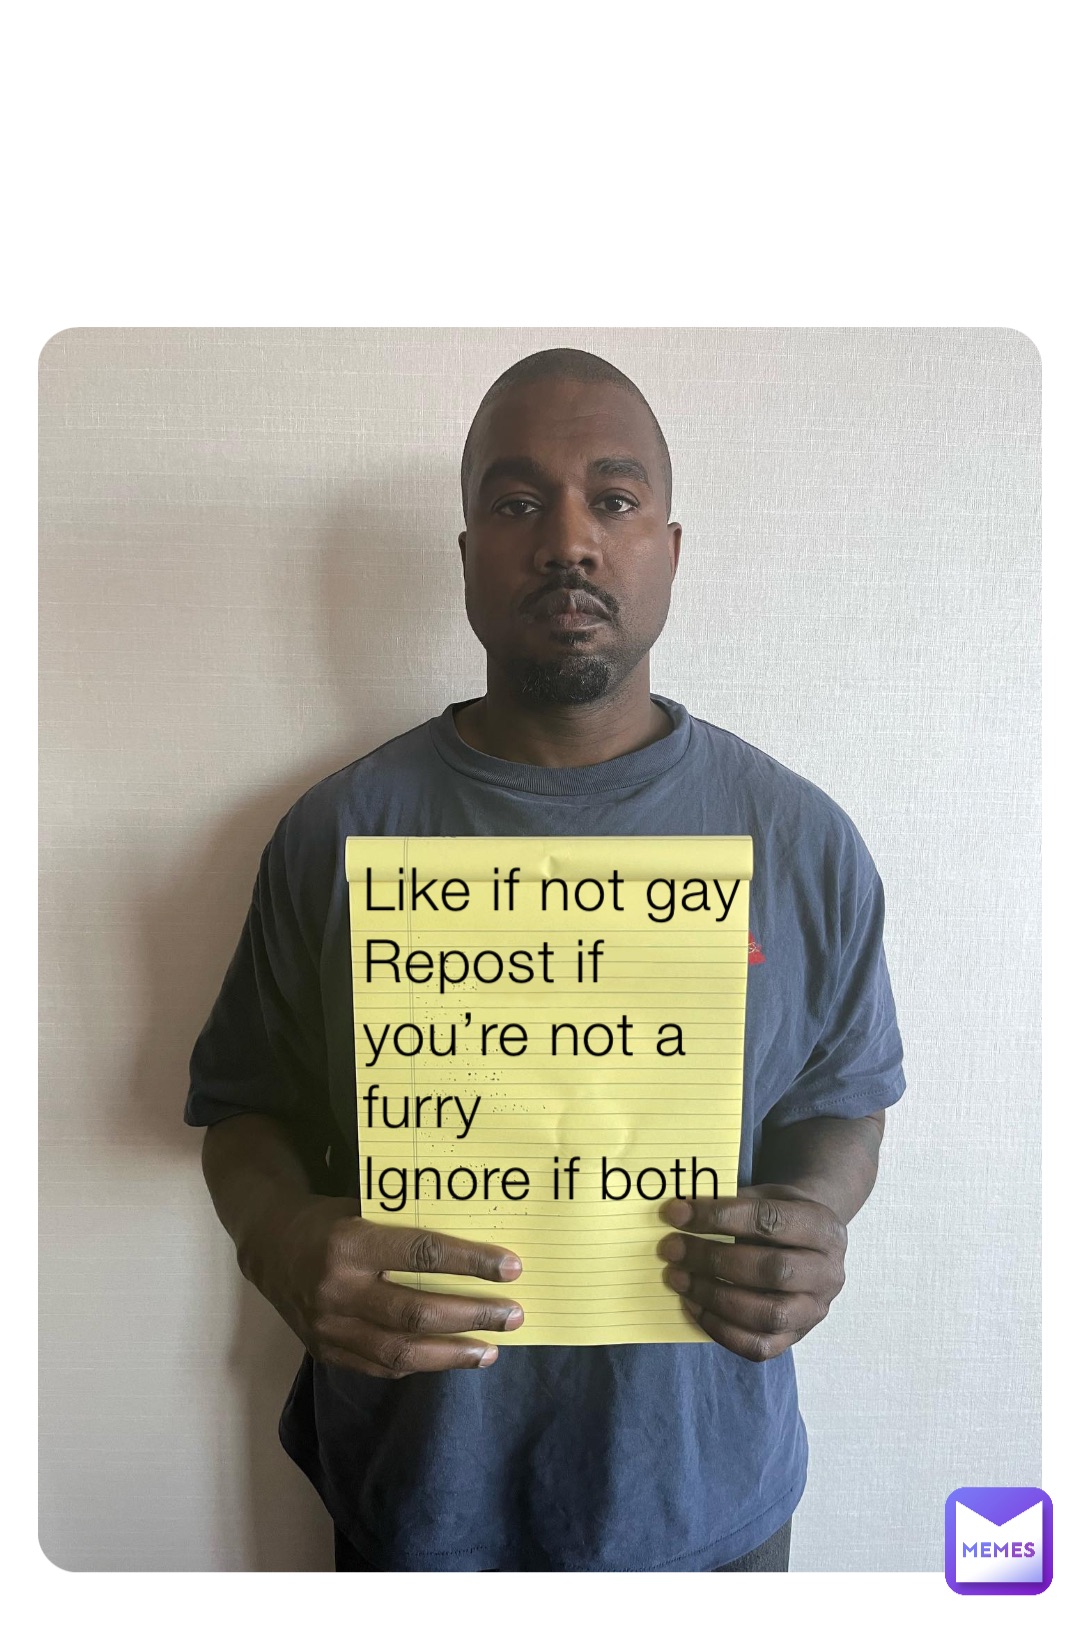 Like if not gay
Repost if you’re not a furry 
Ignore if both